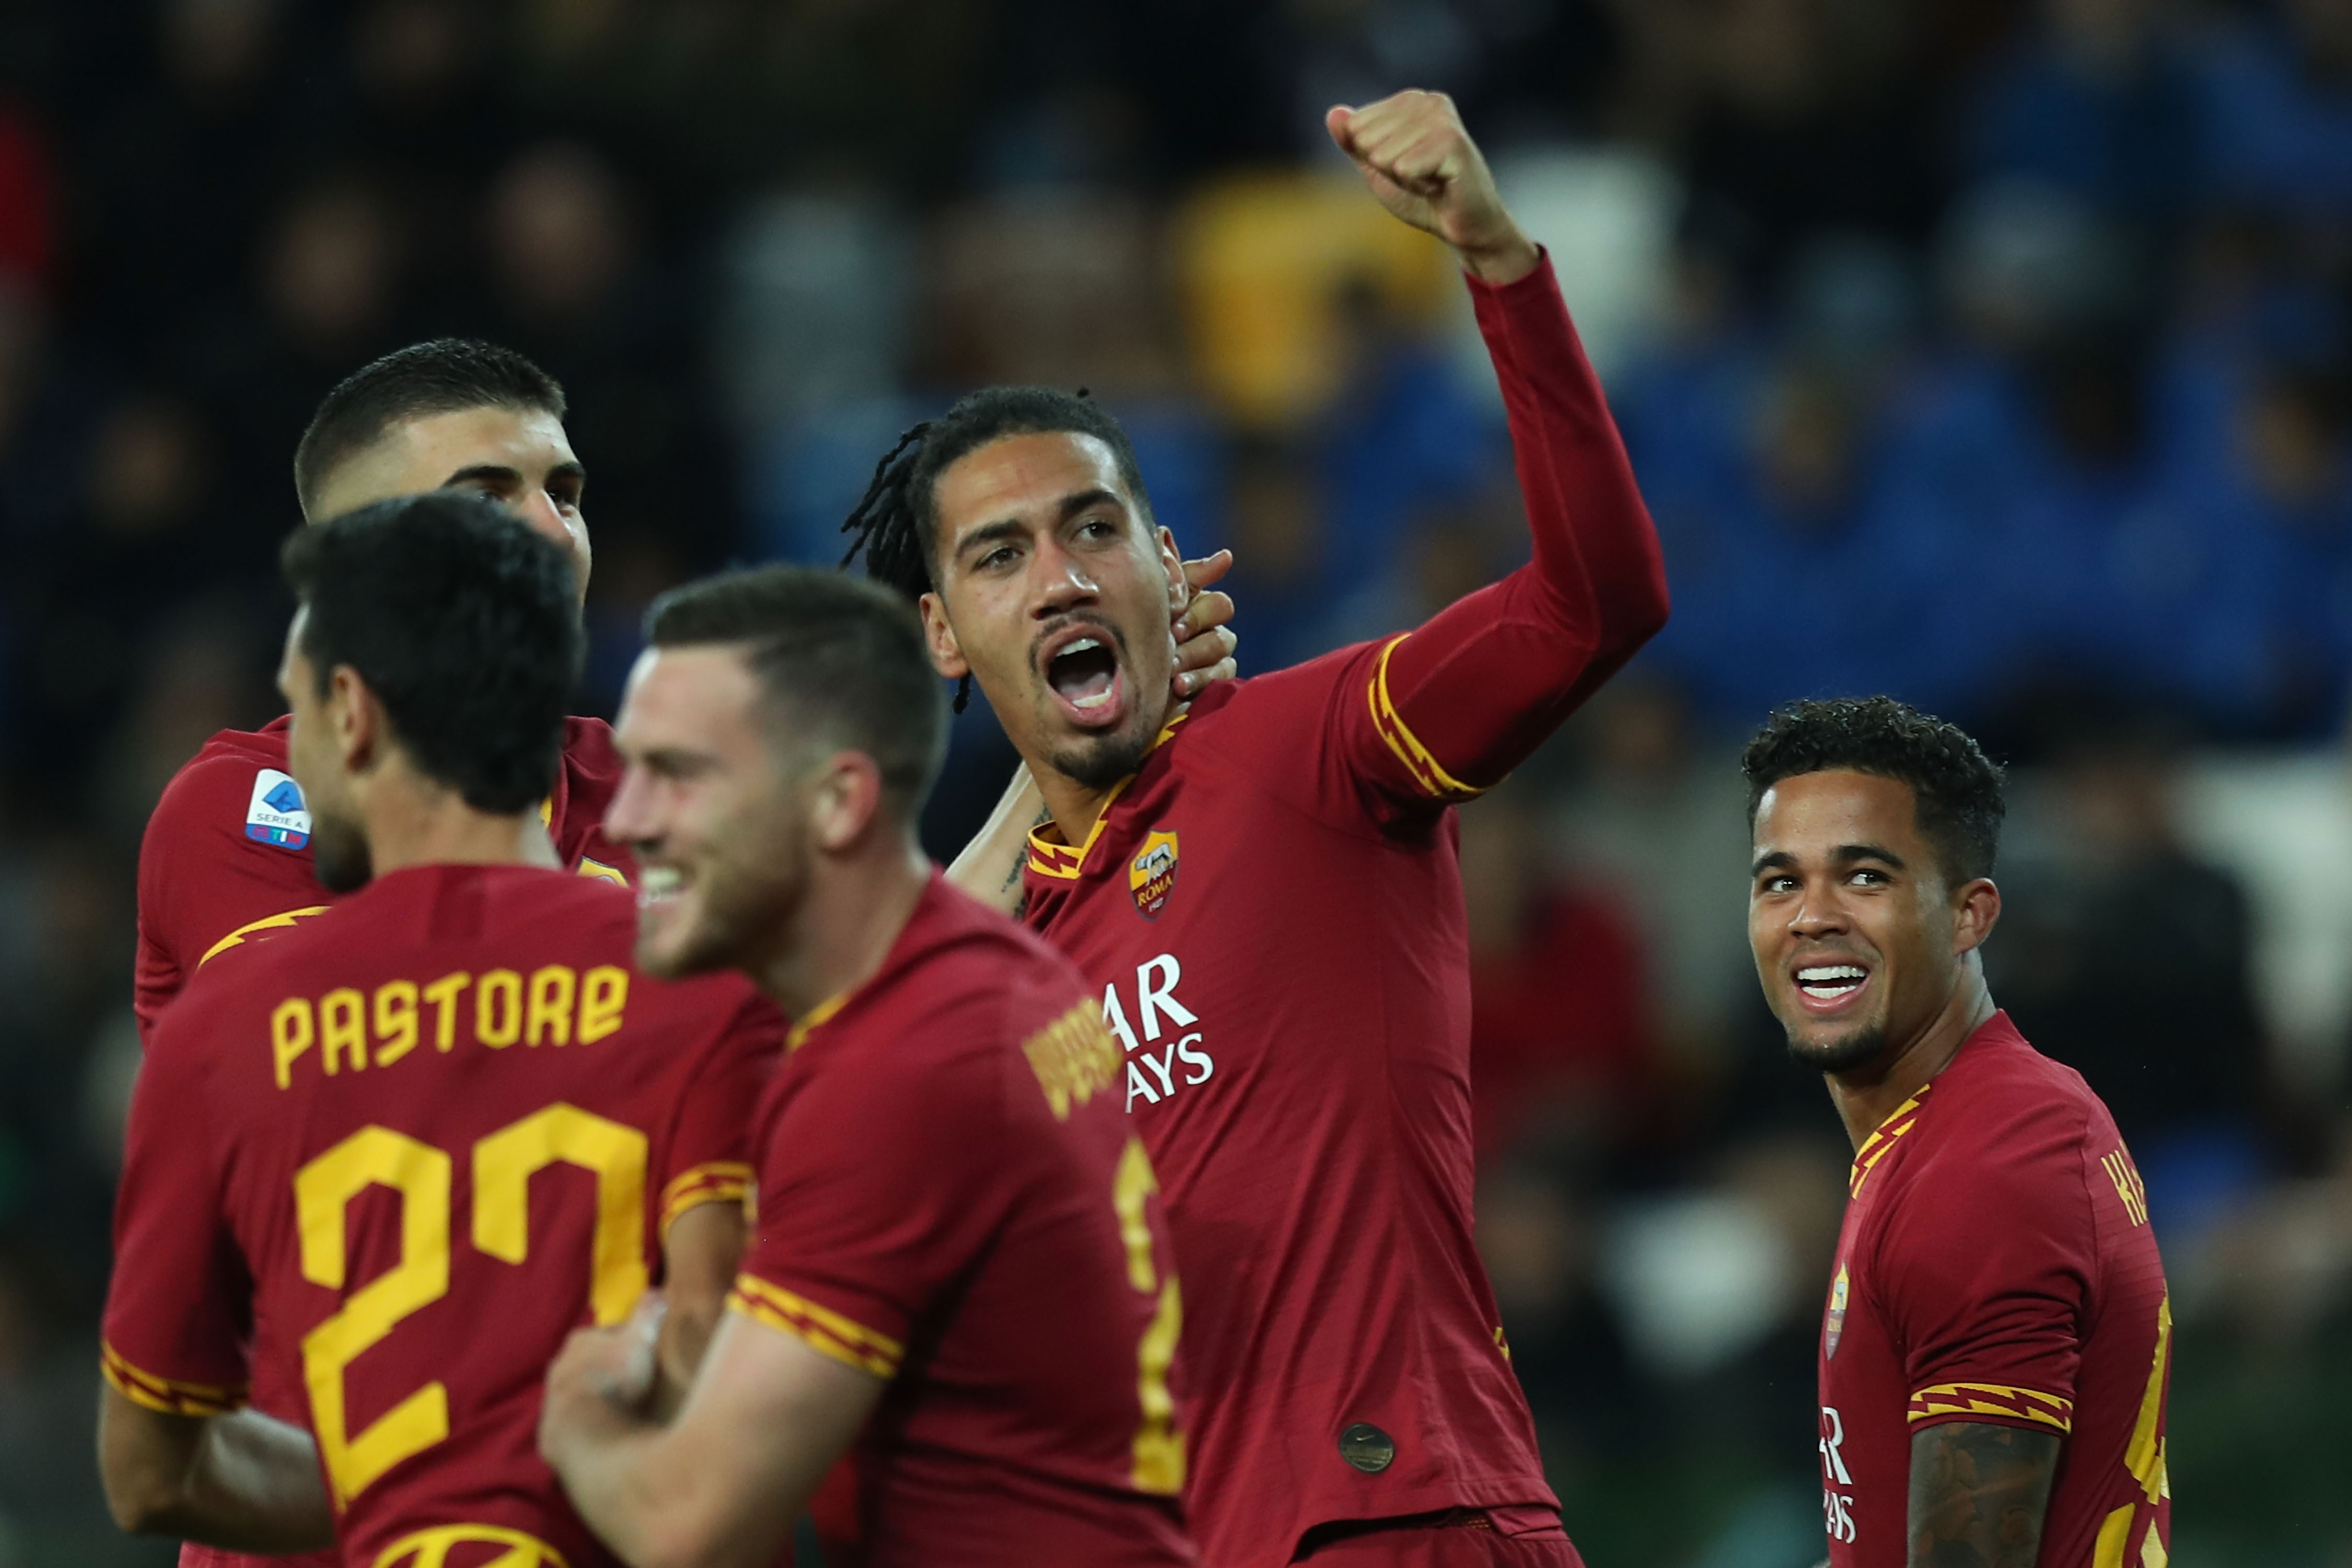 Smalling found redemption in Italy. (Photo by Gabriele Maltinti/Getty Images)